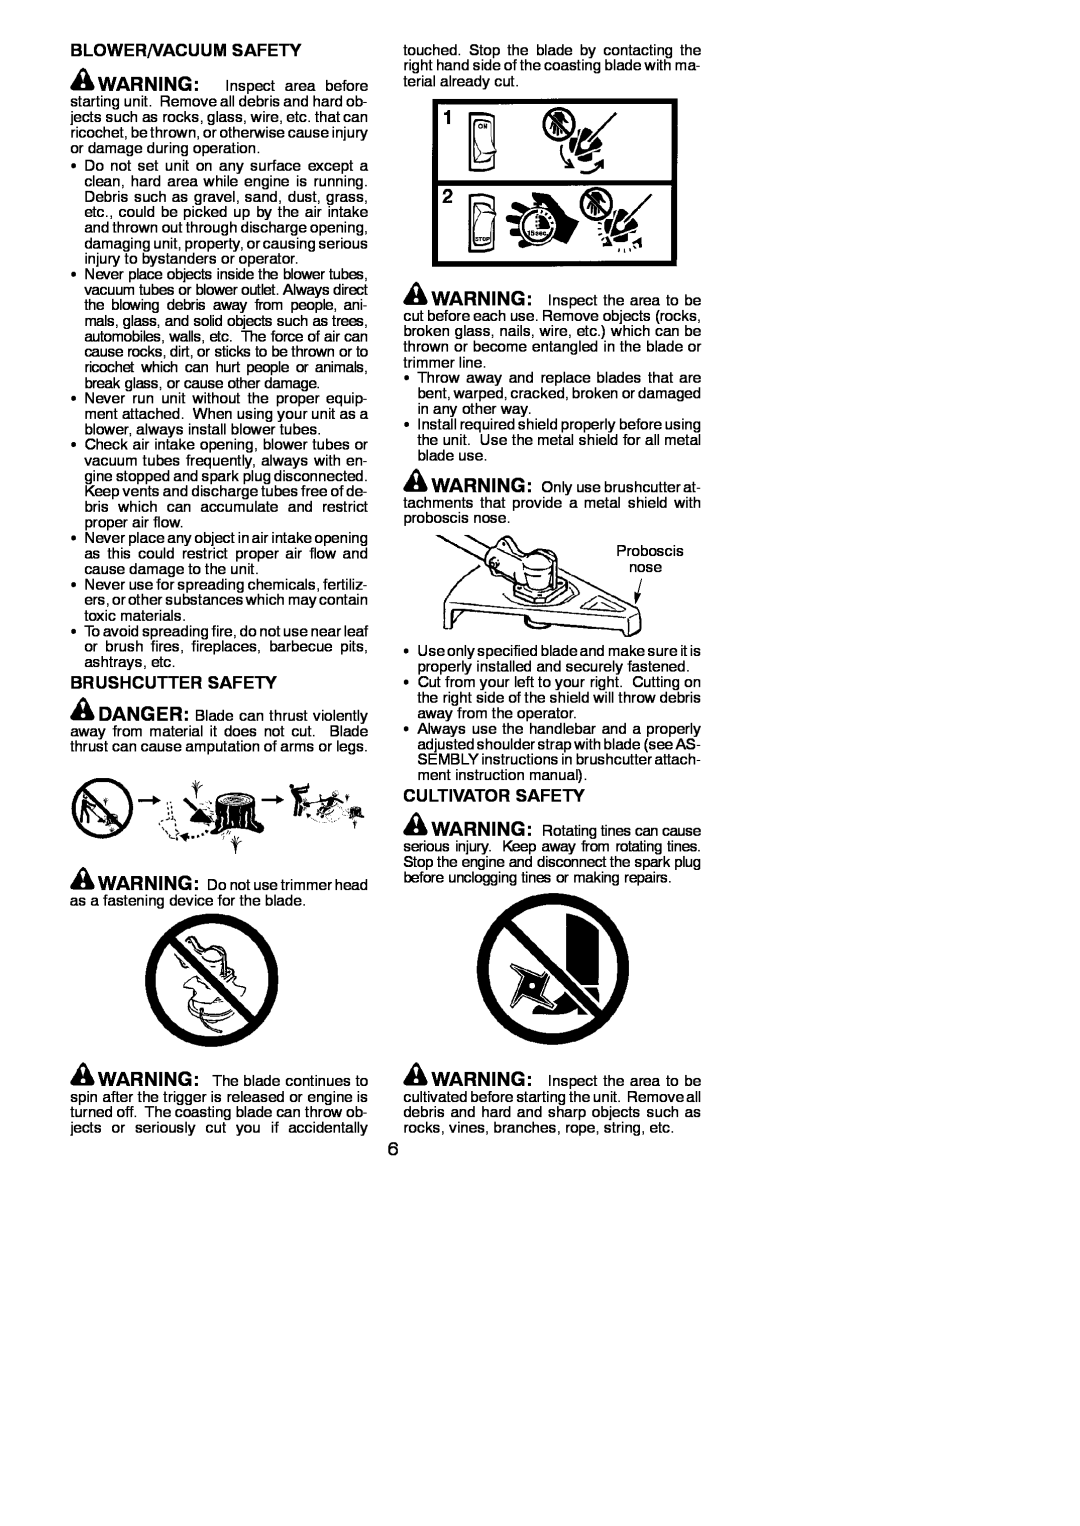 Poulan 952711878, 115270226 instruction manual Blower/Vacuum Safety, Brushcutter Safety, Cultivator Safety 